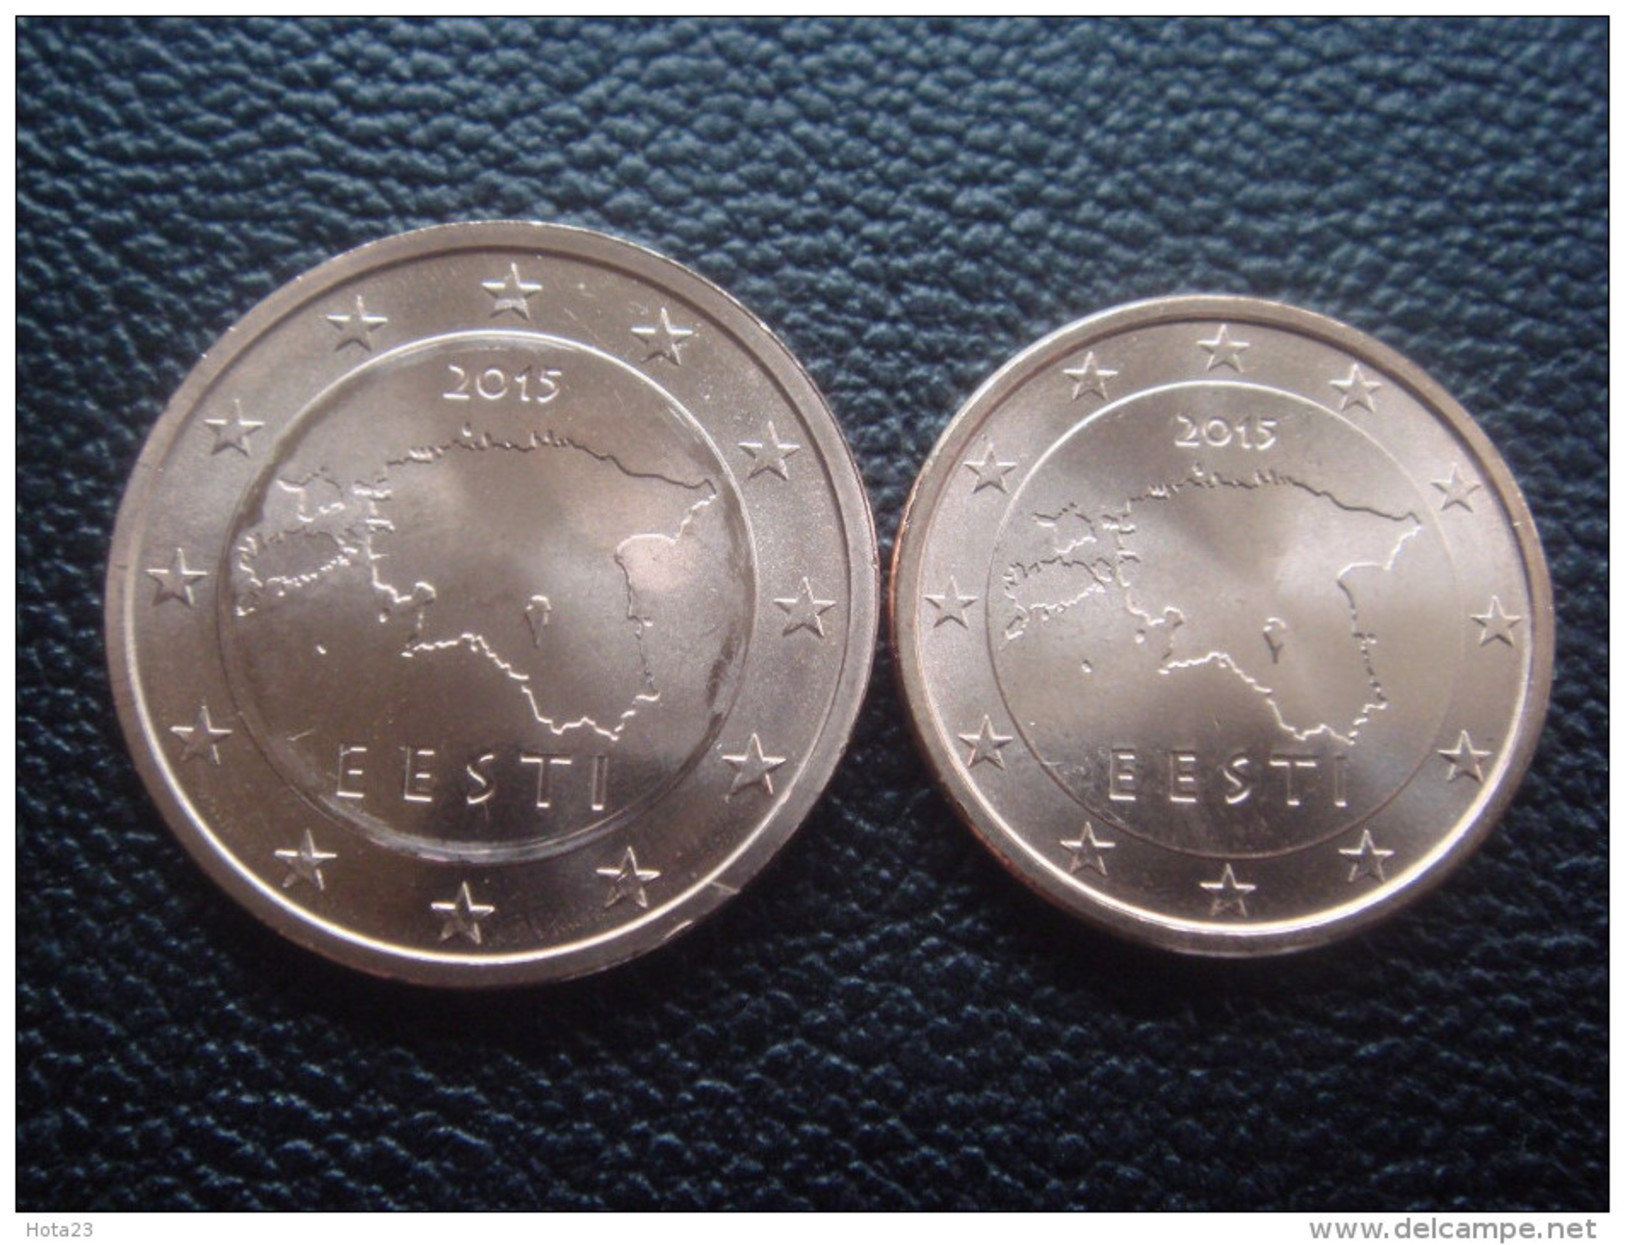 Estonia 2015 Euro Coins Set UNC 1 And 2 CENT FROM MINT ROLL MAP - Estland